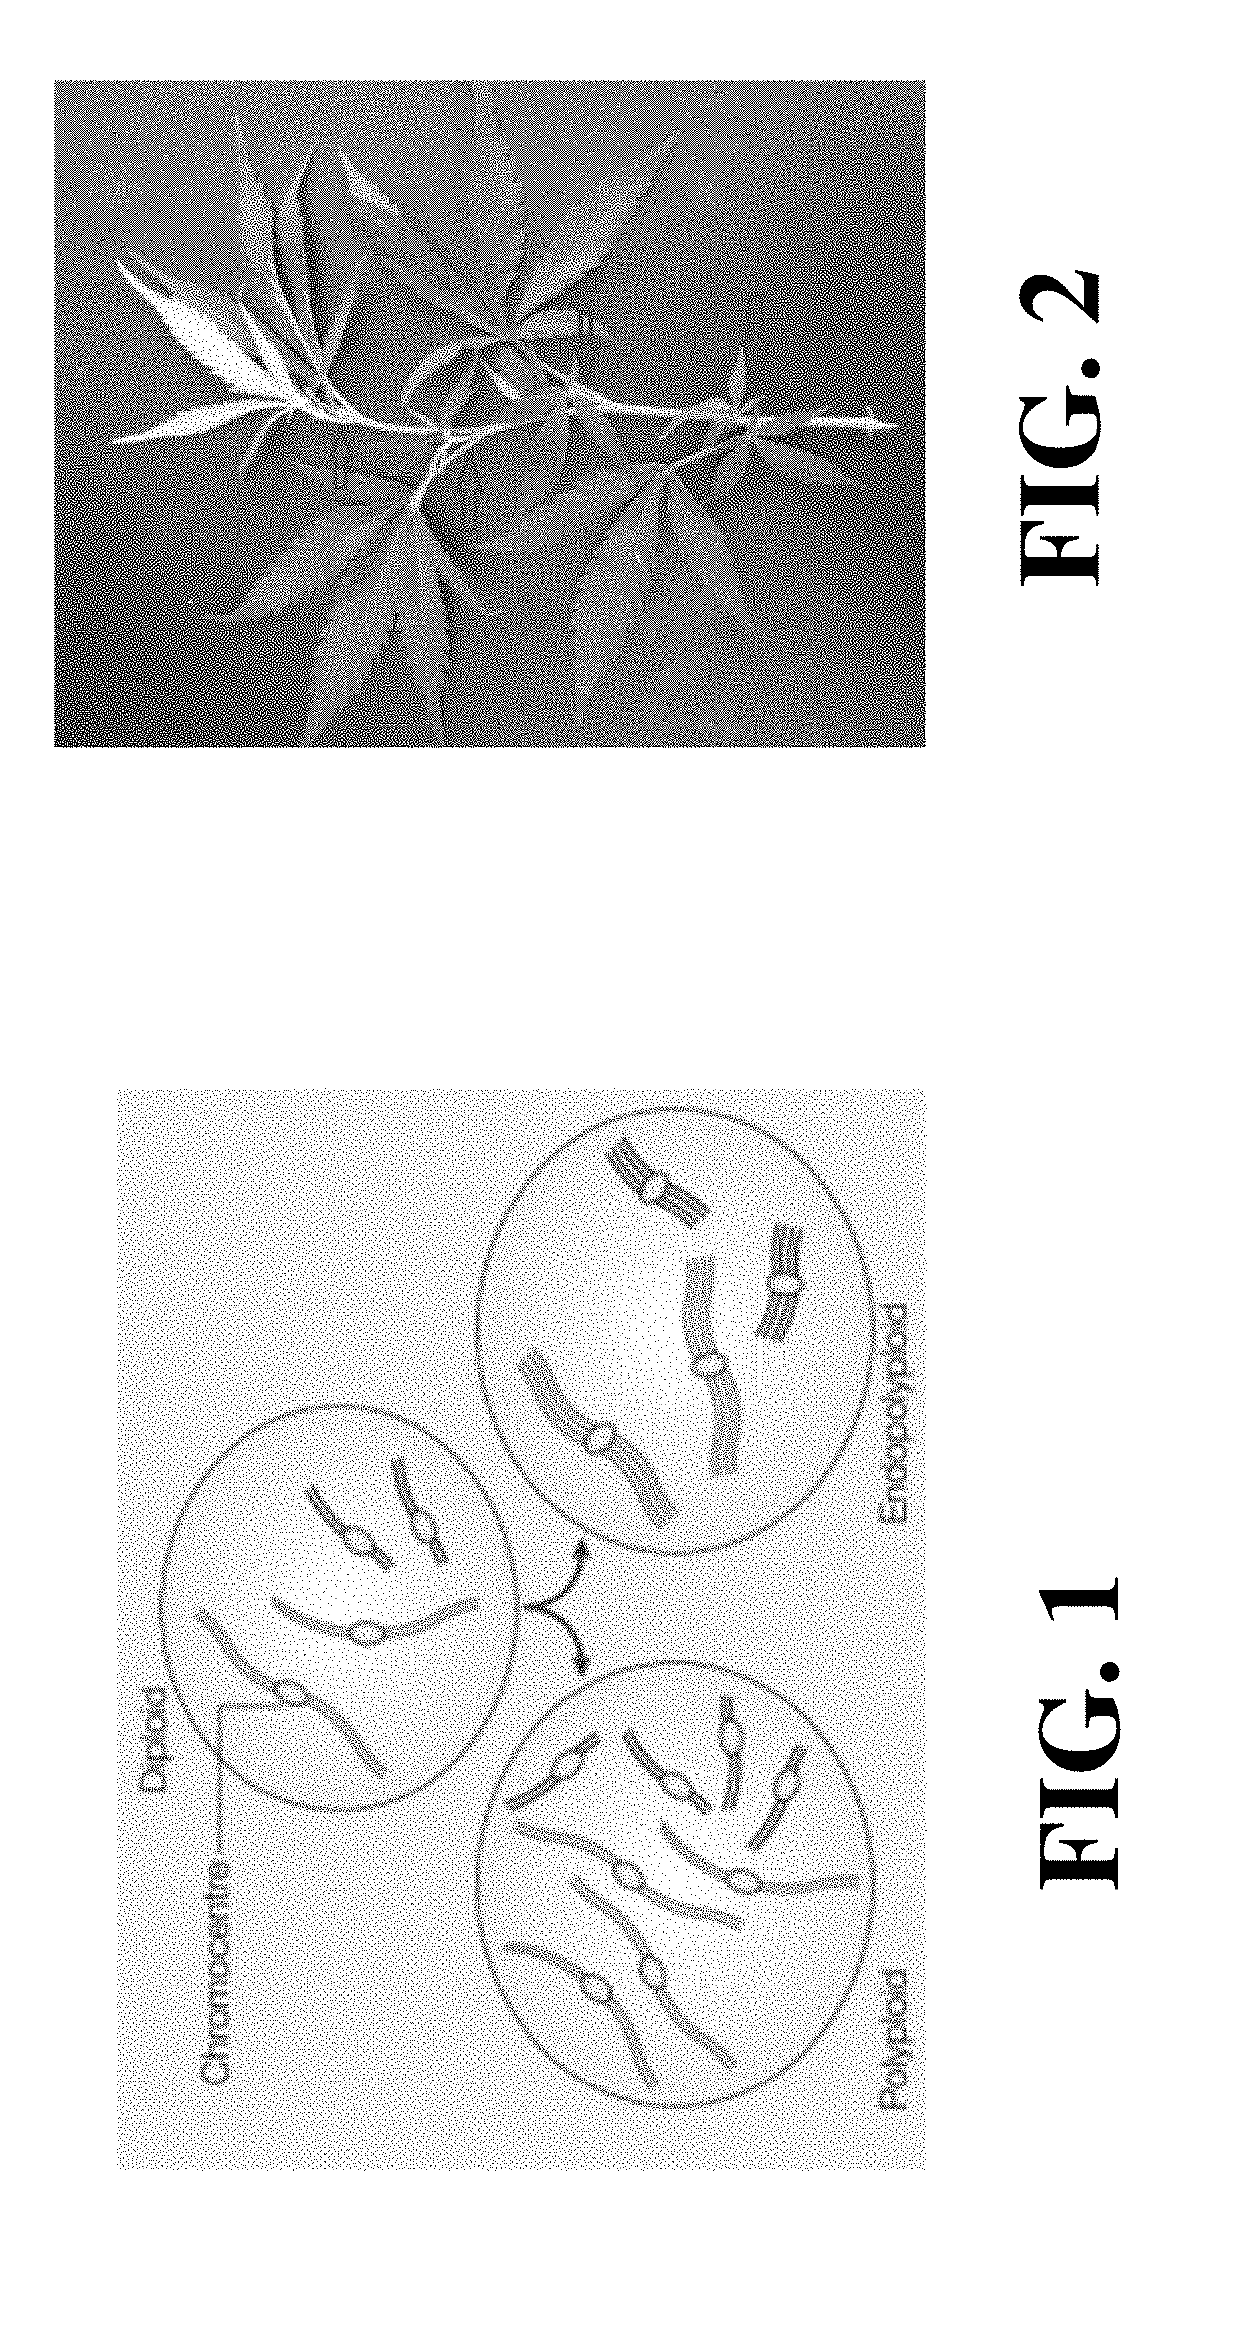 Methods for inducing polyploidy in cannabis